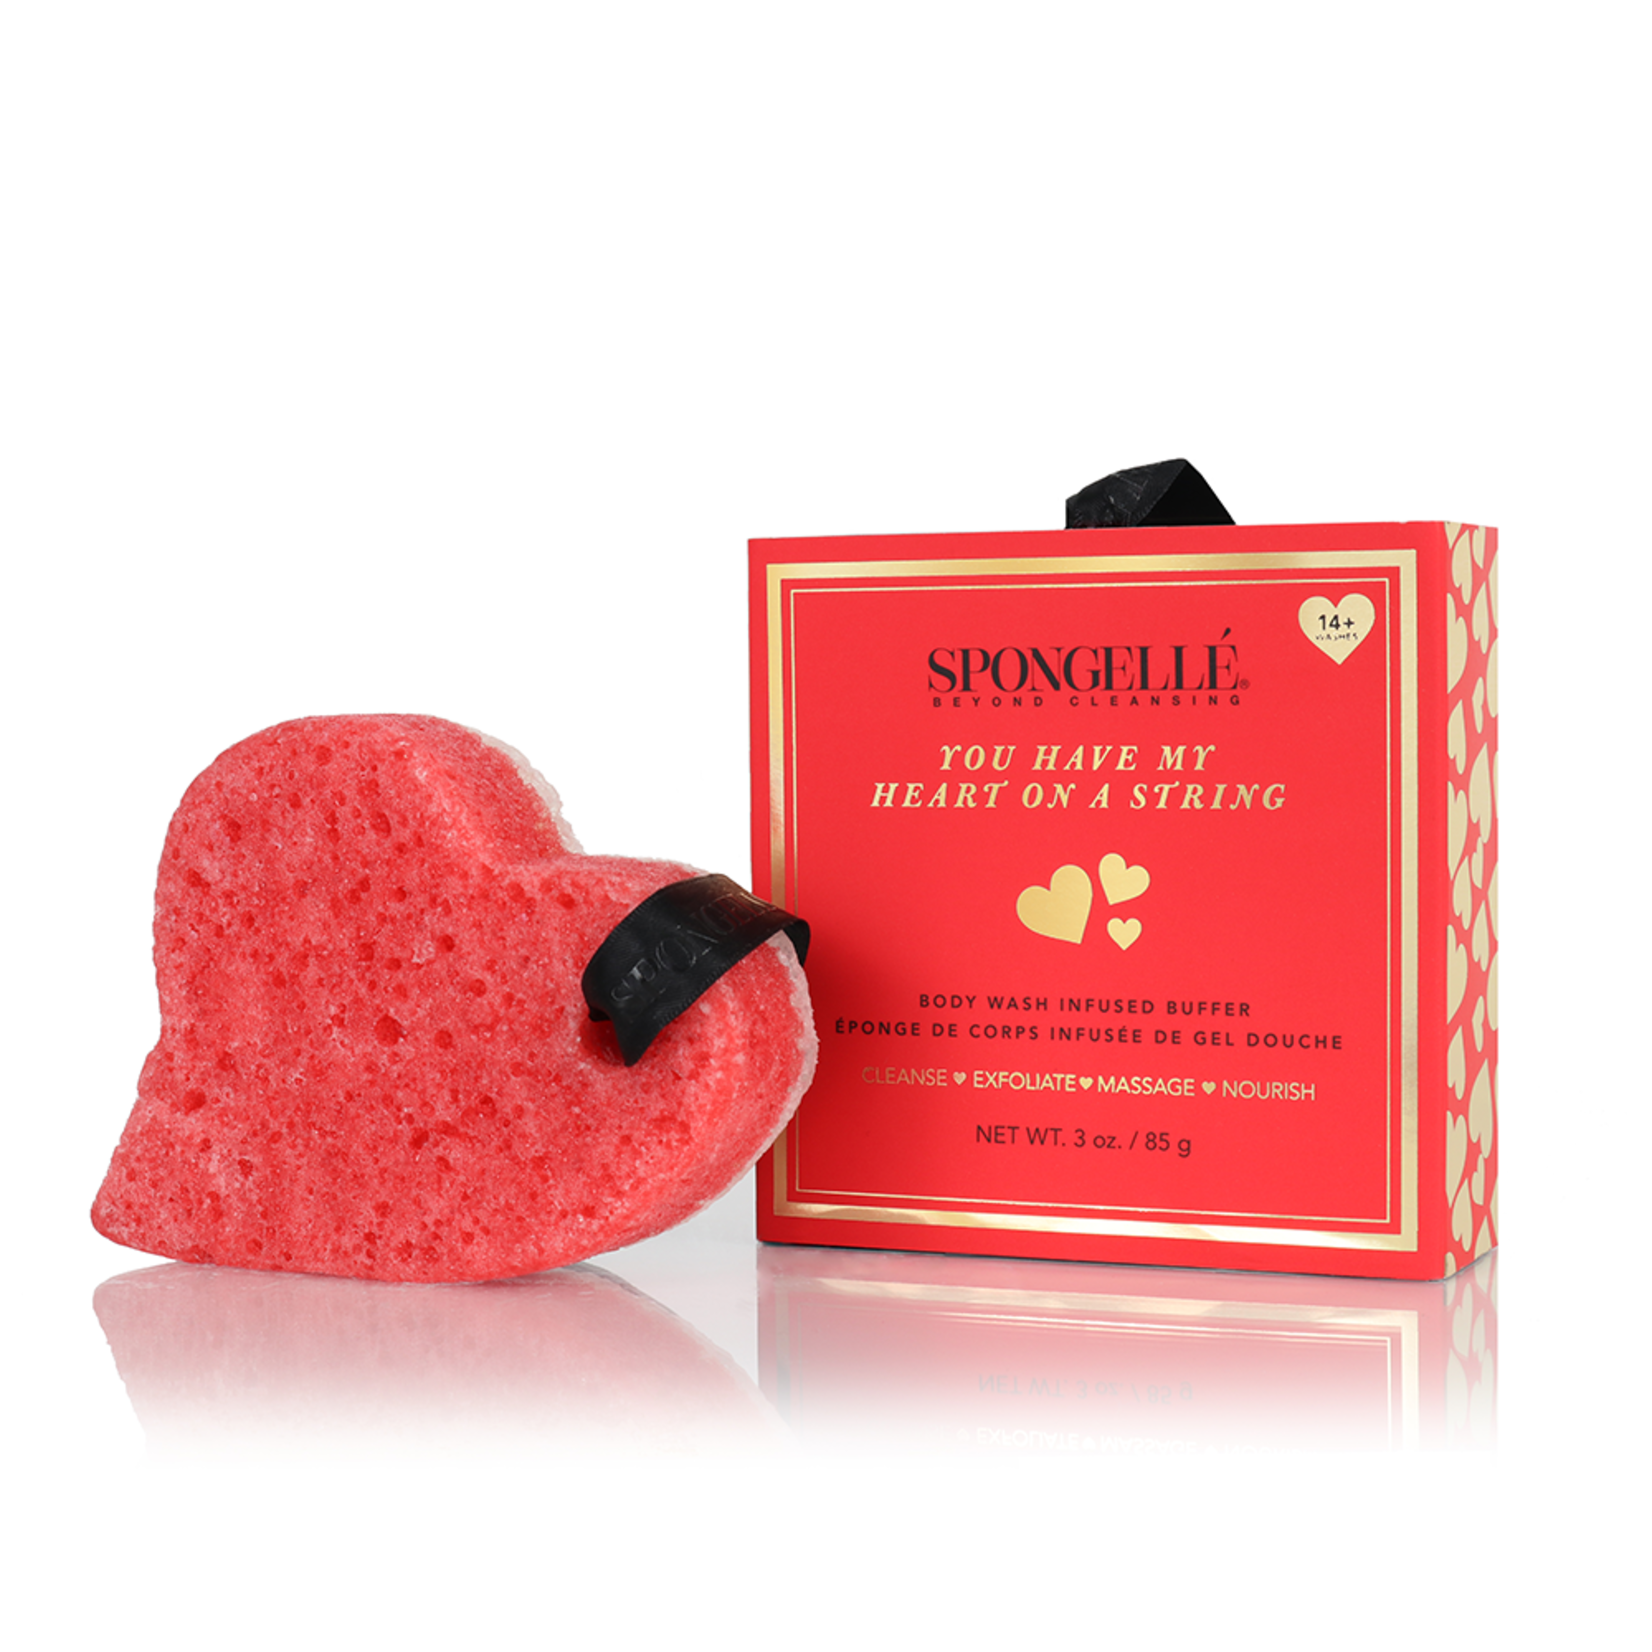 Spongelle BOXED HEART ON A STRING CAMELIA ROSE (14+ WASHES) 3OZ